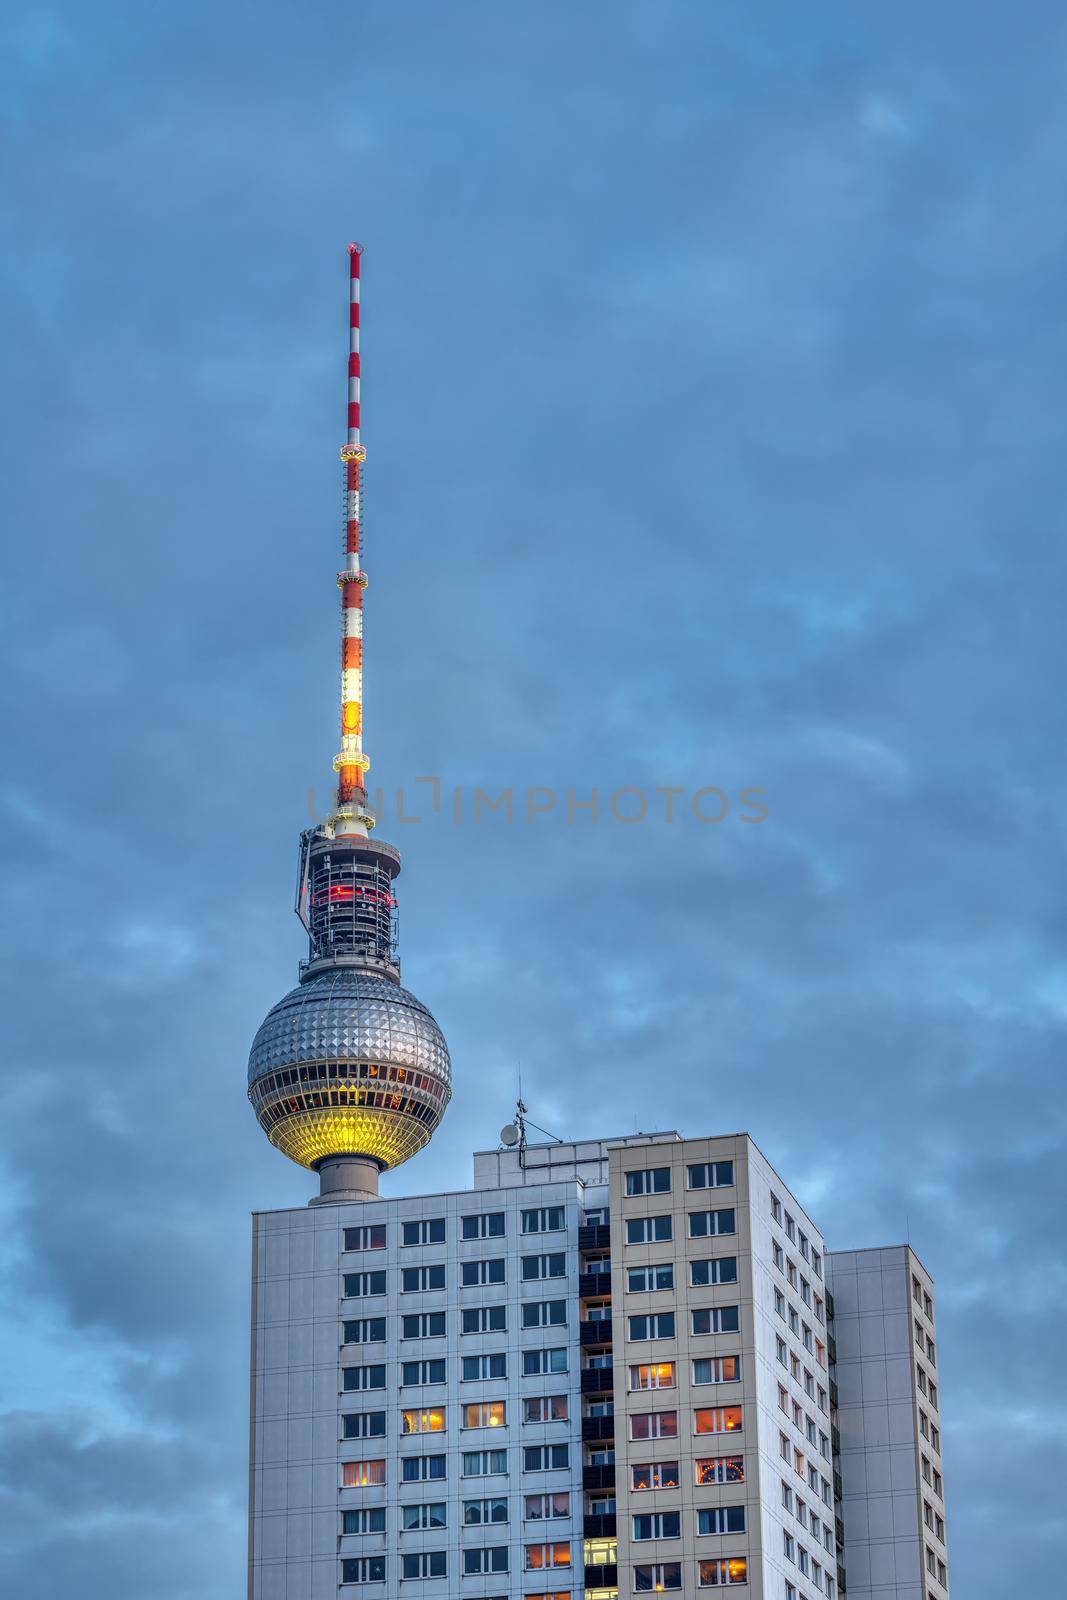 The famous TV Tower of Berlin at dusk with a typical GDR prefabricated apartment building